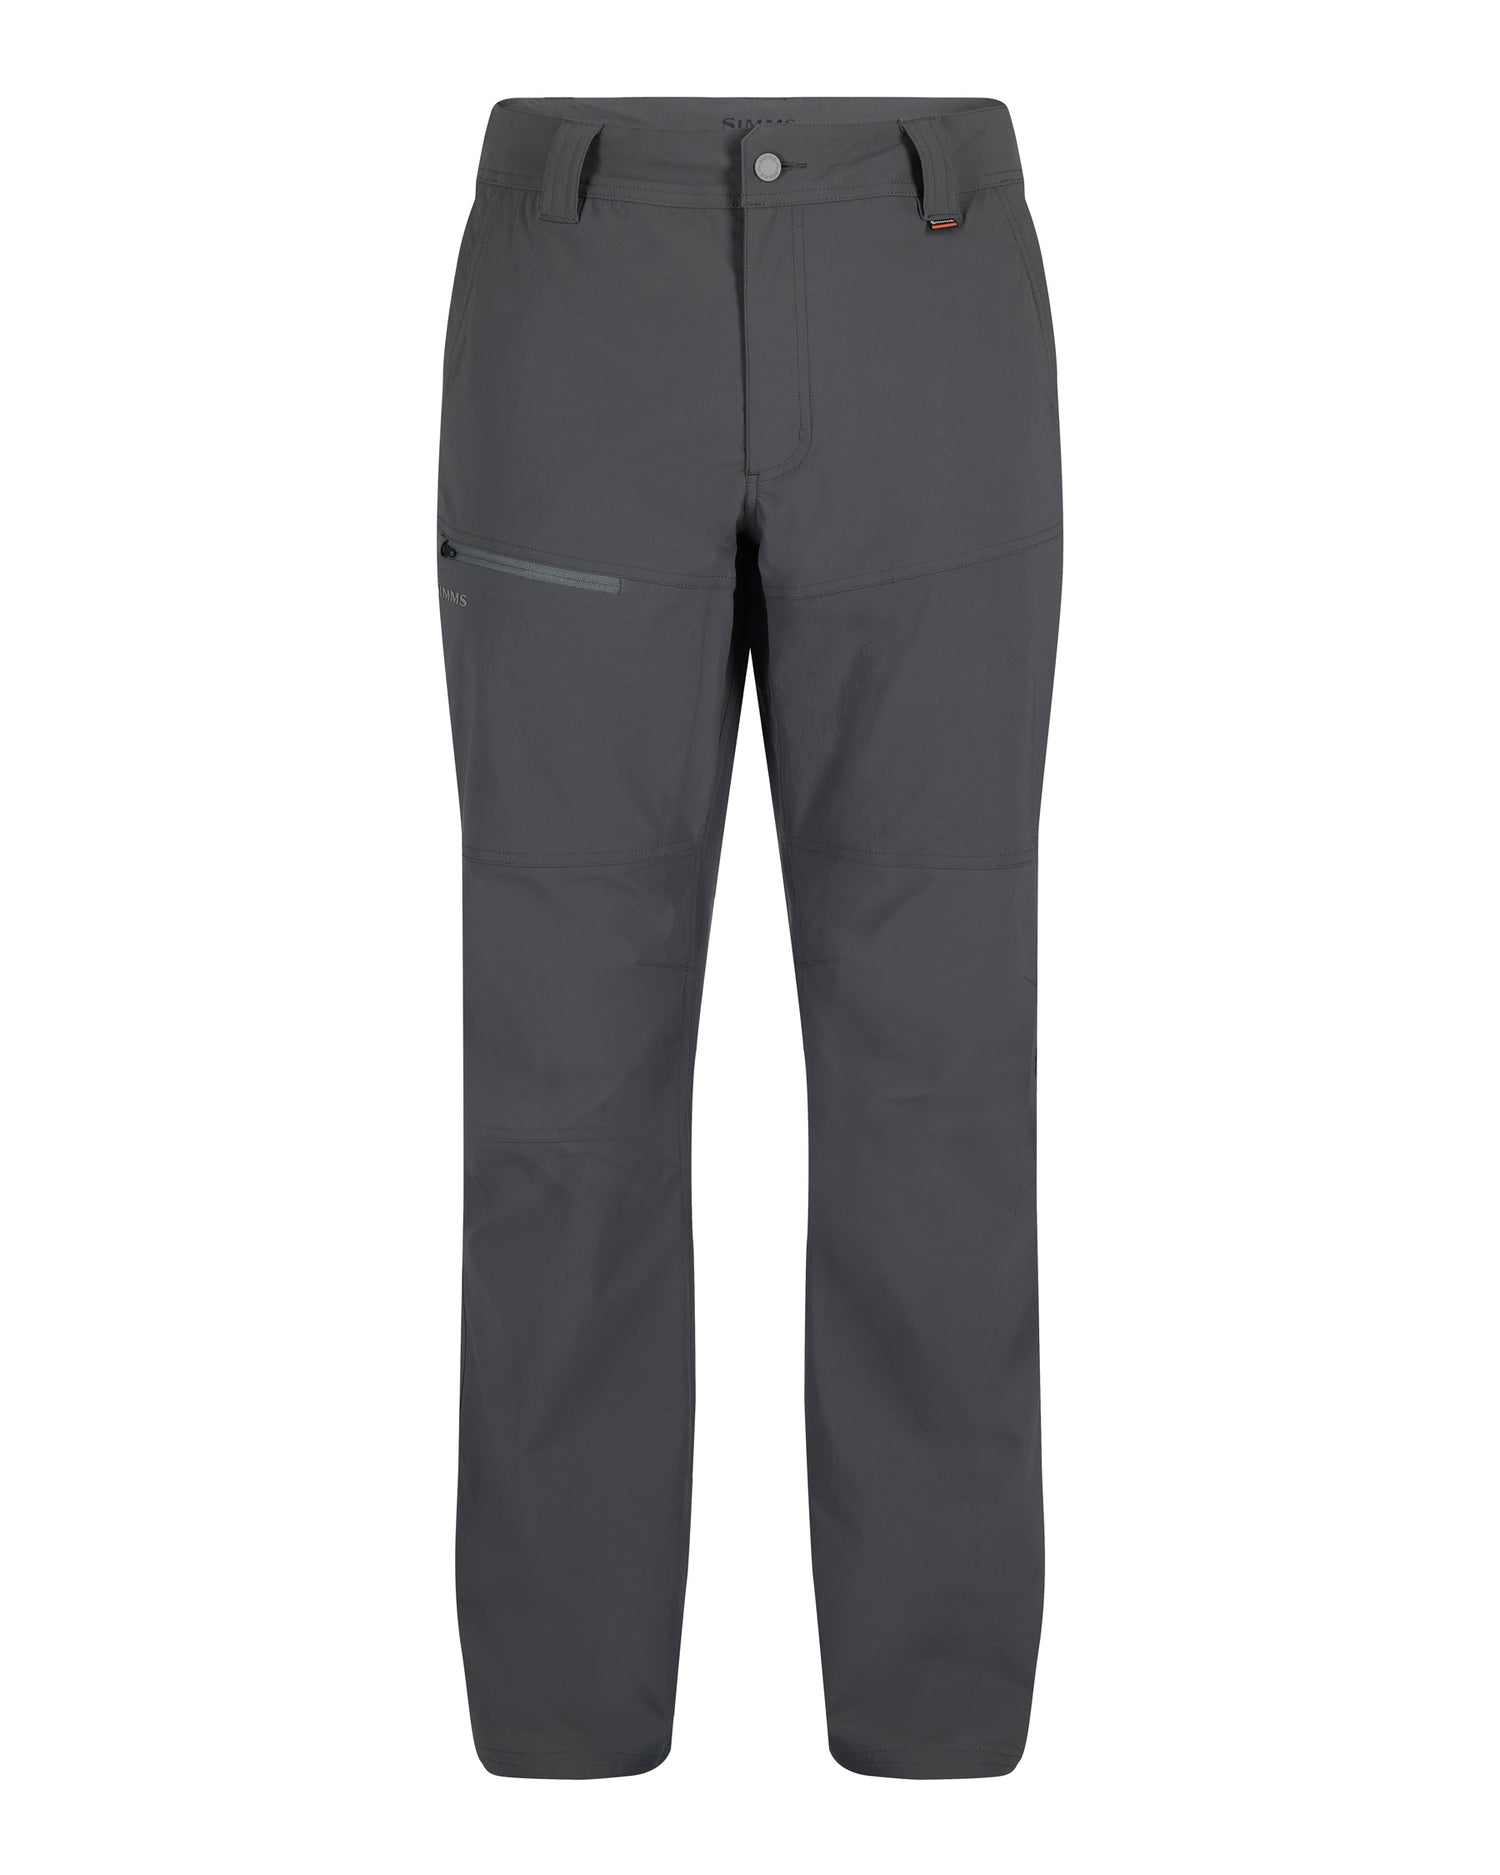    13644-096-guide-pant-Mannequin